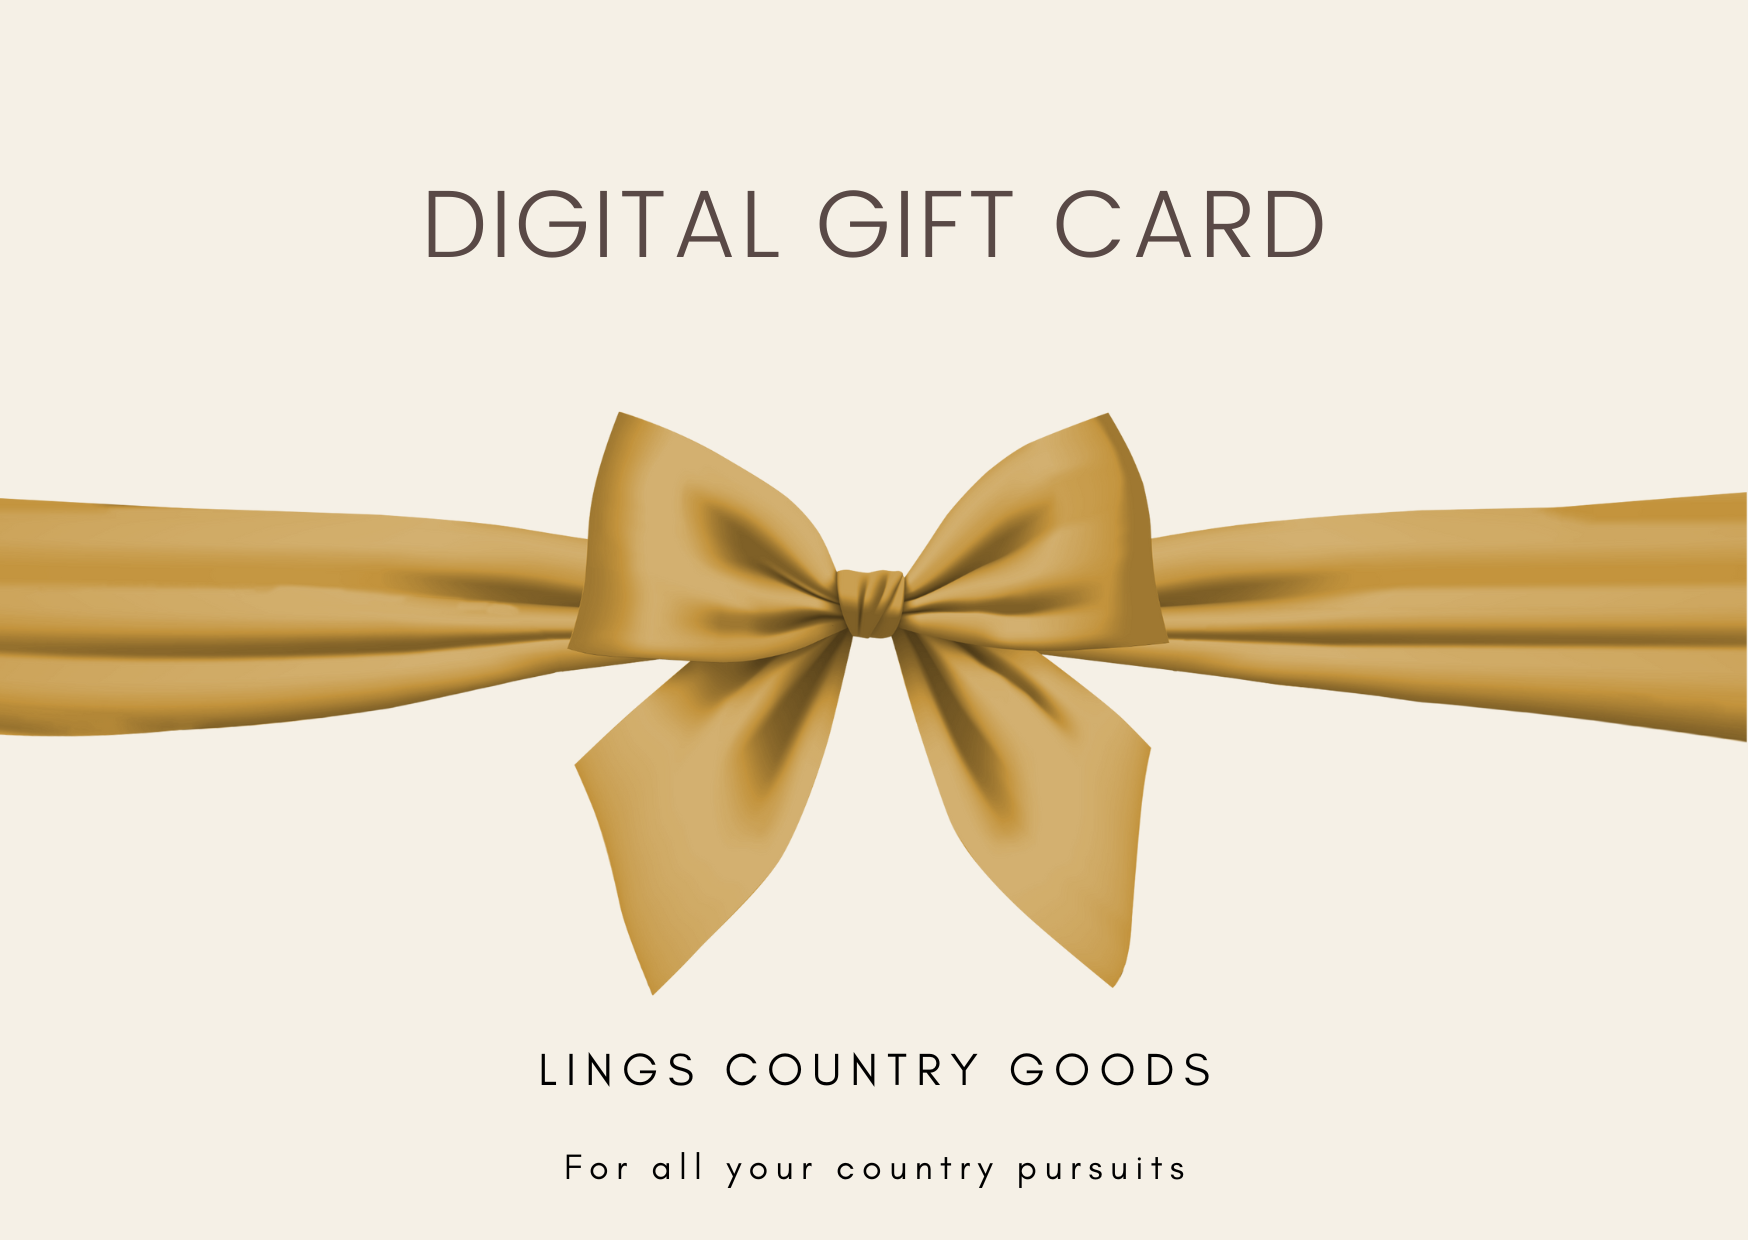 Lings Country Goods Digital Gift Card